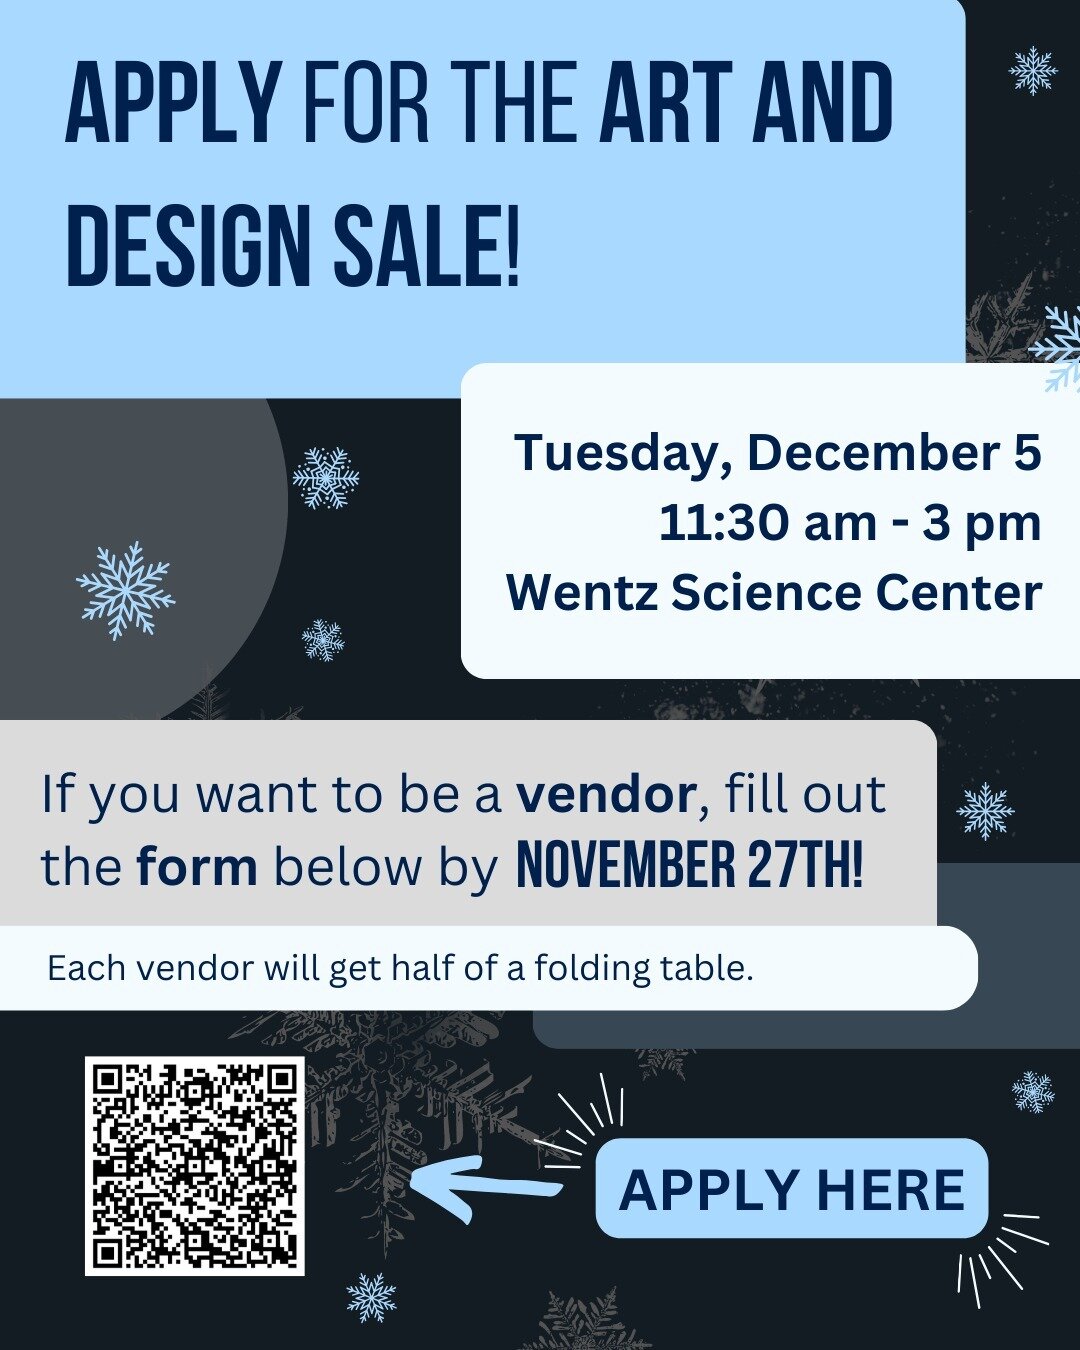 Come on by the Wentz Science Center this December 5th from 11:30 am to 3 pm for the art and design sale! Get ahead on holiday shopping and support amazing local artists and designers.

Looking to sell your art during the sale? Make sure to sign up by